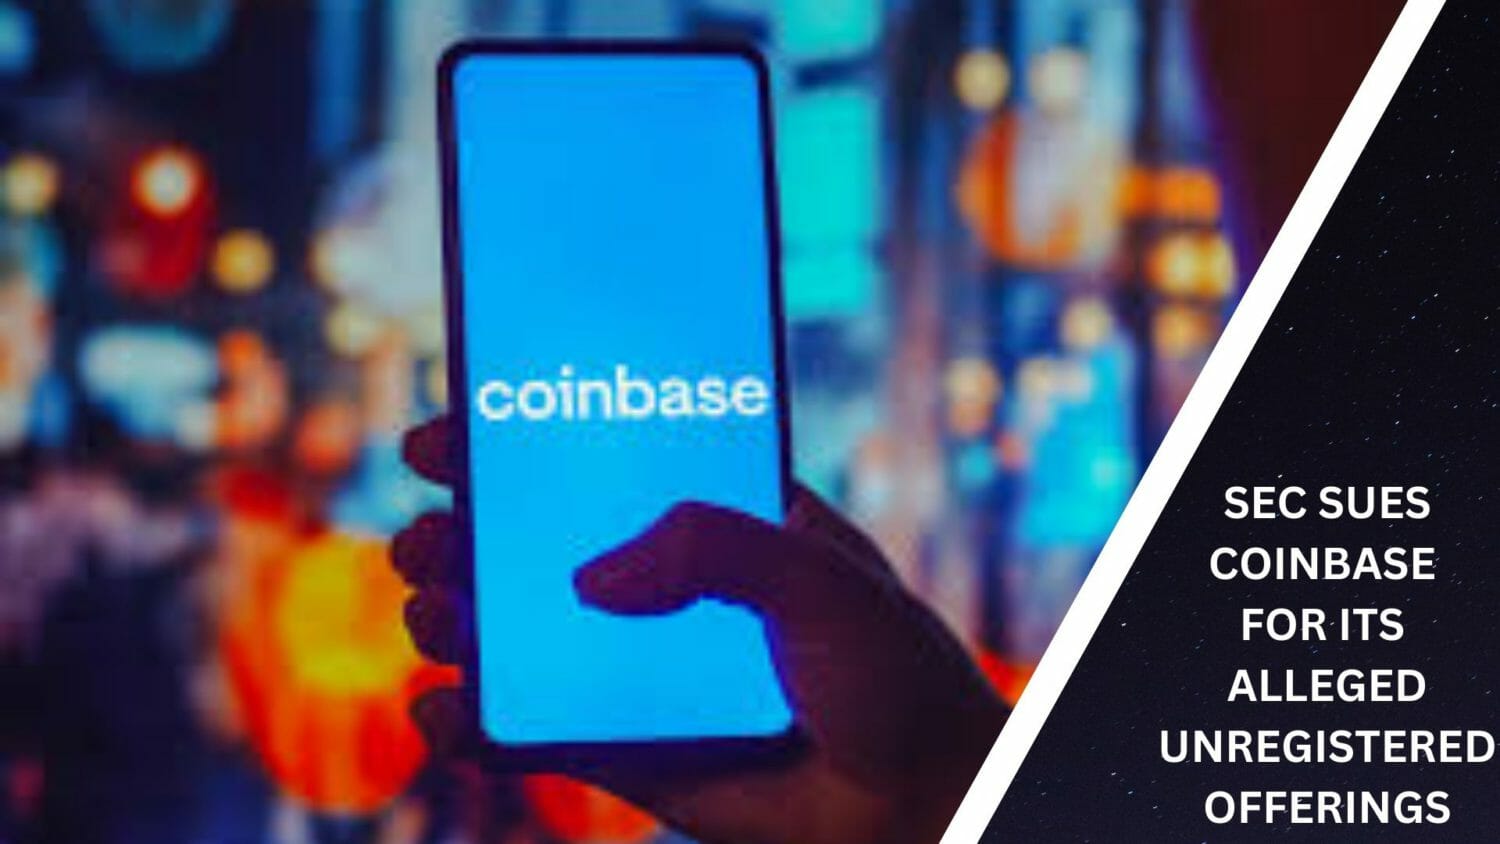 Sec Sues Coinbase For Its Alleged Unregistered Offerings